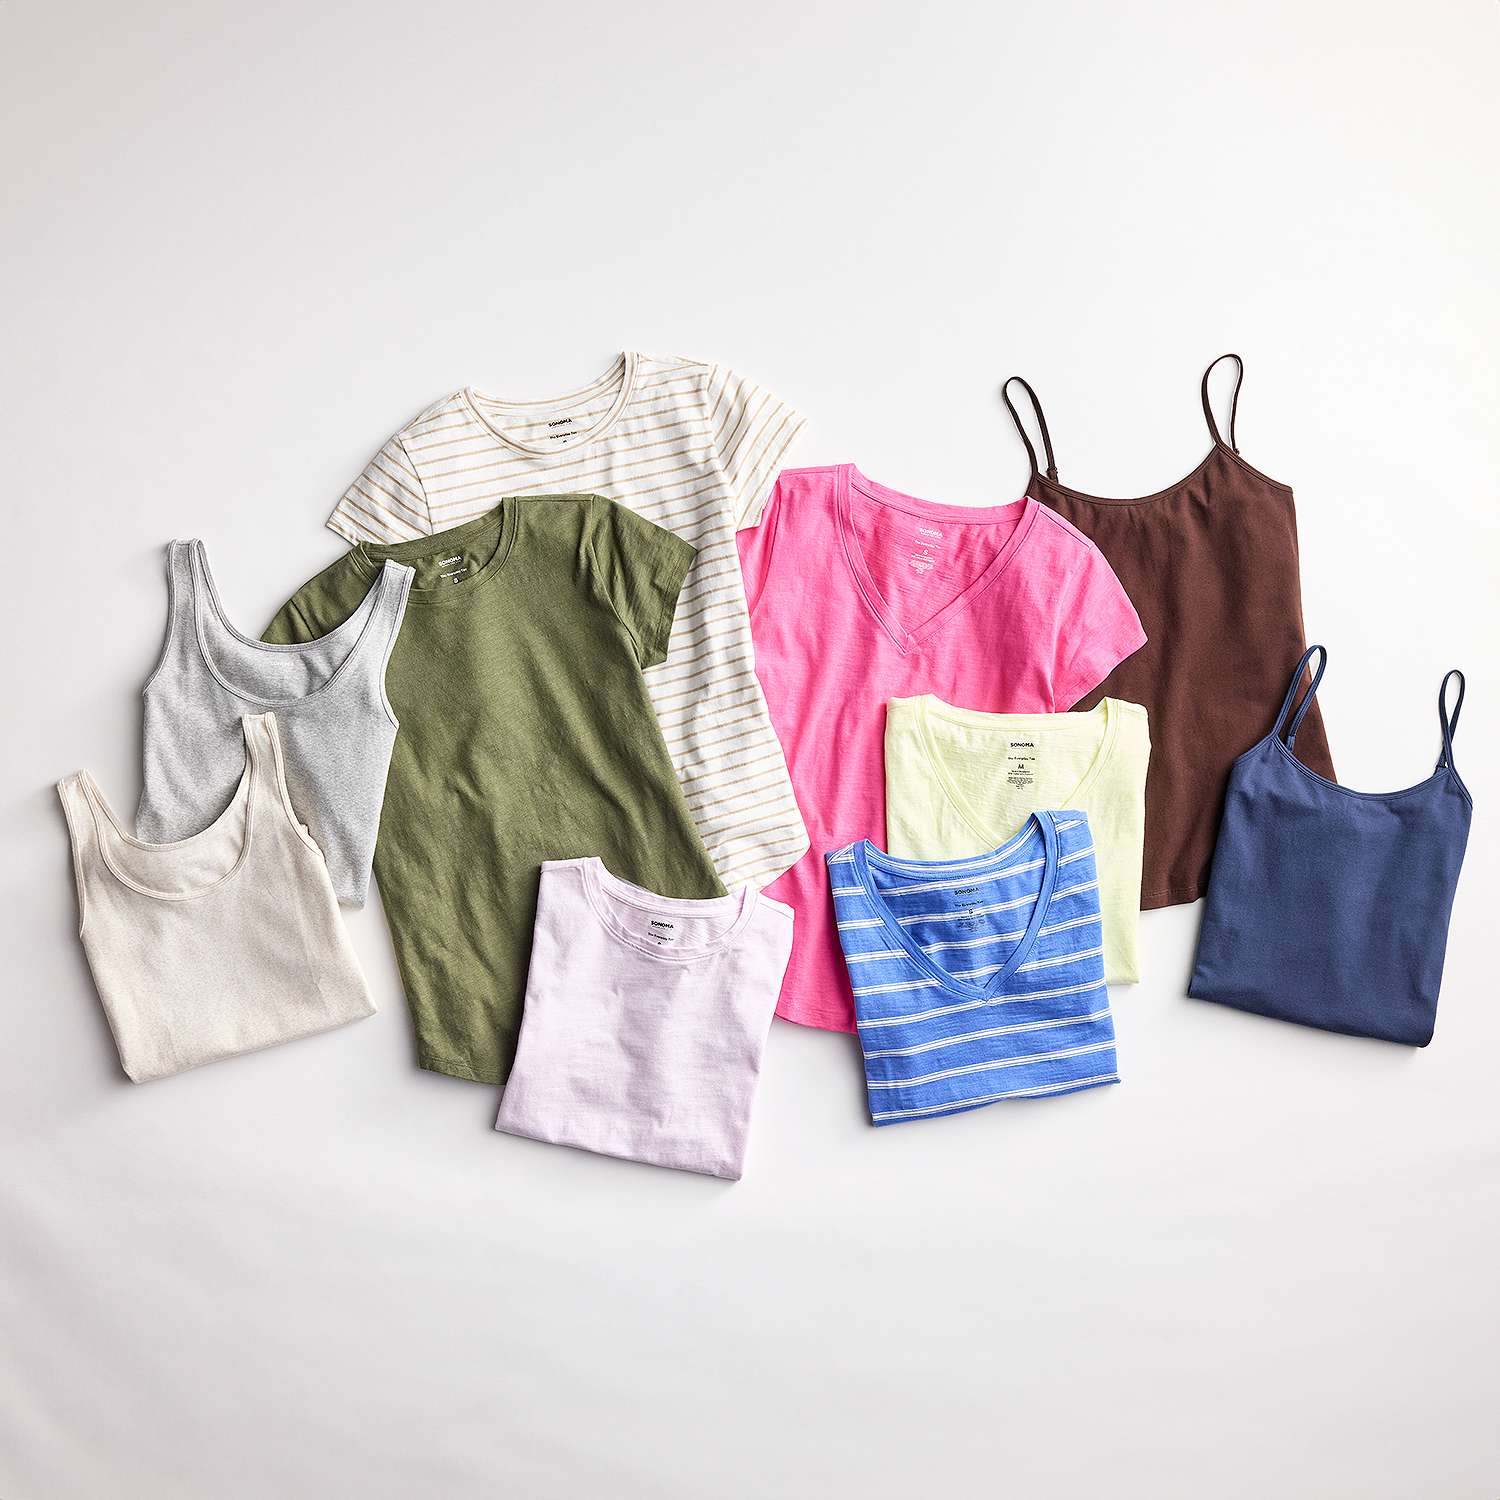 Sonoma Goods For Life Women's Short Sleeve Tees (Various) $4.24 or SO Women's Short Sleeve Tees (various) $4.24 & More + Free Store Pickup at Kohl's or Free Shipping on $49+